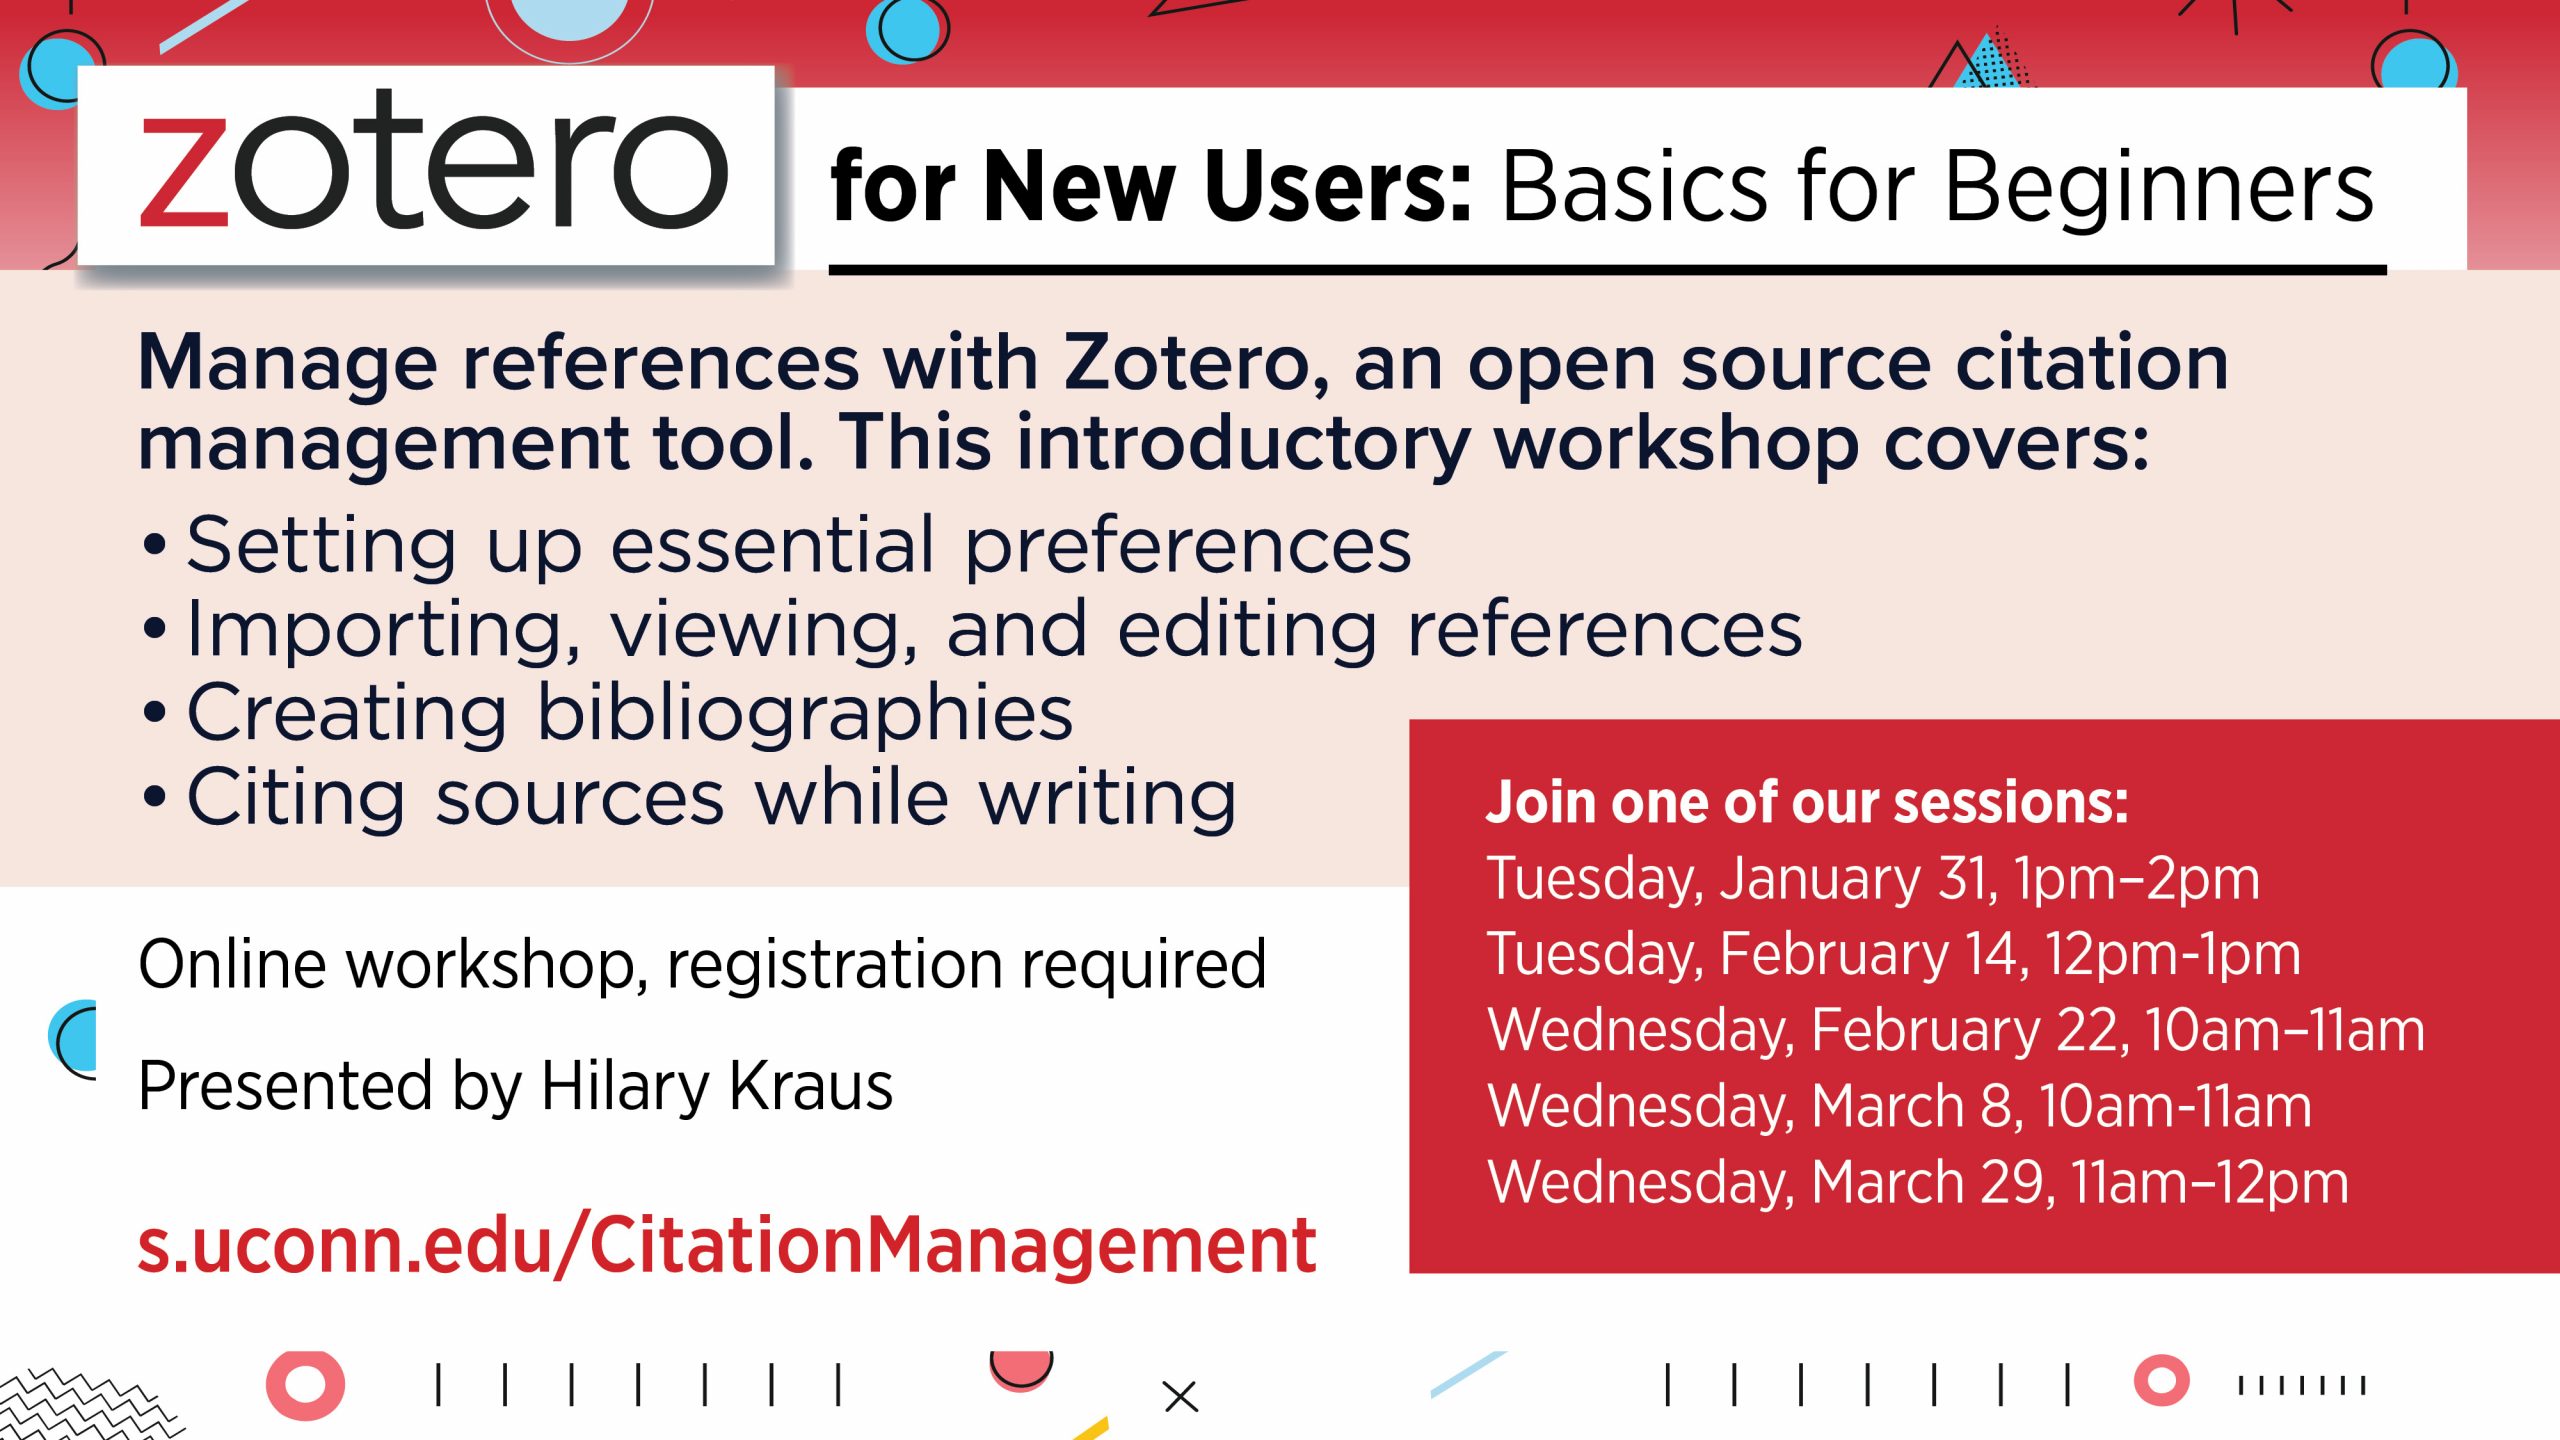 Zotero for New Users: Basics for Beginners. Manage references with Zotero, an open source citation management tool. This introductory workshop covers: Setting up essential preferences, Importing, viewing, and editing references, Creating bibliographies, Citing sources while writing. Online workshop, registration required. Presented by Hilary Kraus. More info and register at: s.uconn.edu/CitationManagement. Join one of our sessions: Tuesday, January 31, 1pm–2pm; Tuesday, February 14, 12pm-1pm; Wednesday, February 22, 10am–11am; Wednesday, March 8, 10am-11am; Wednesday, March 29, 11am–12pm